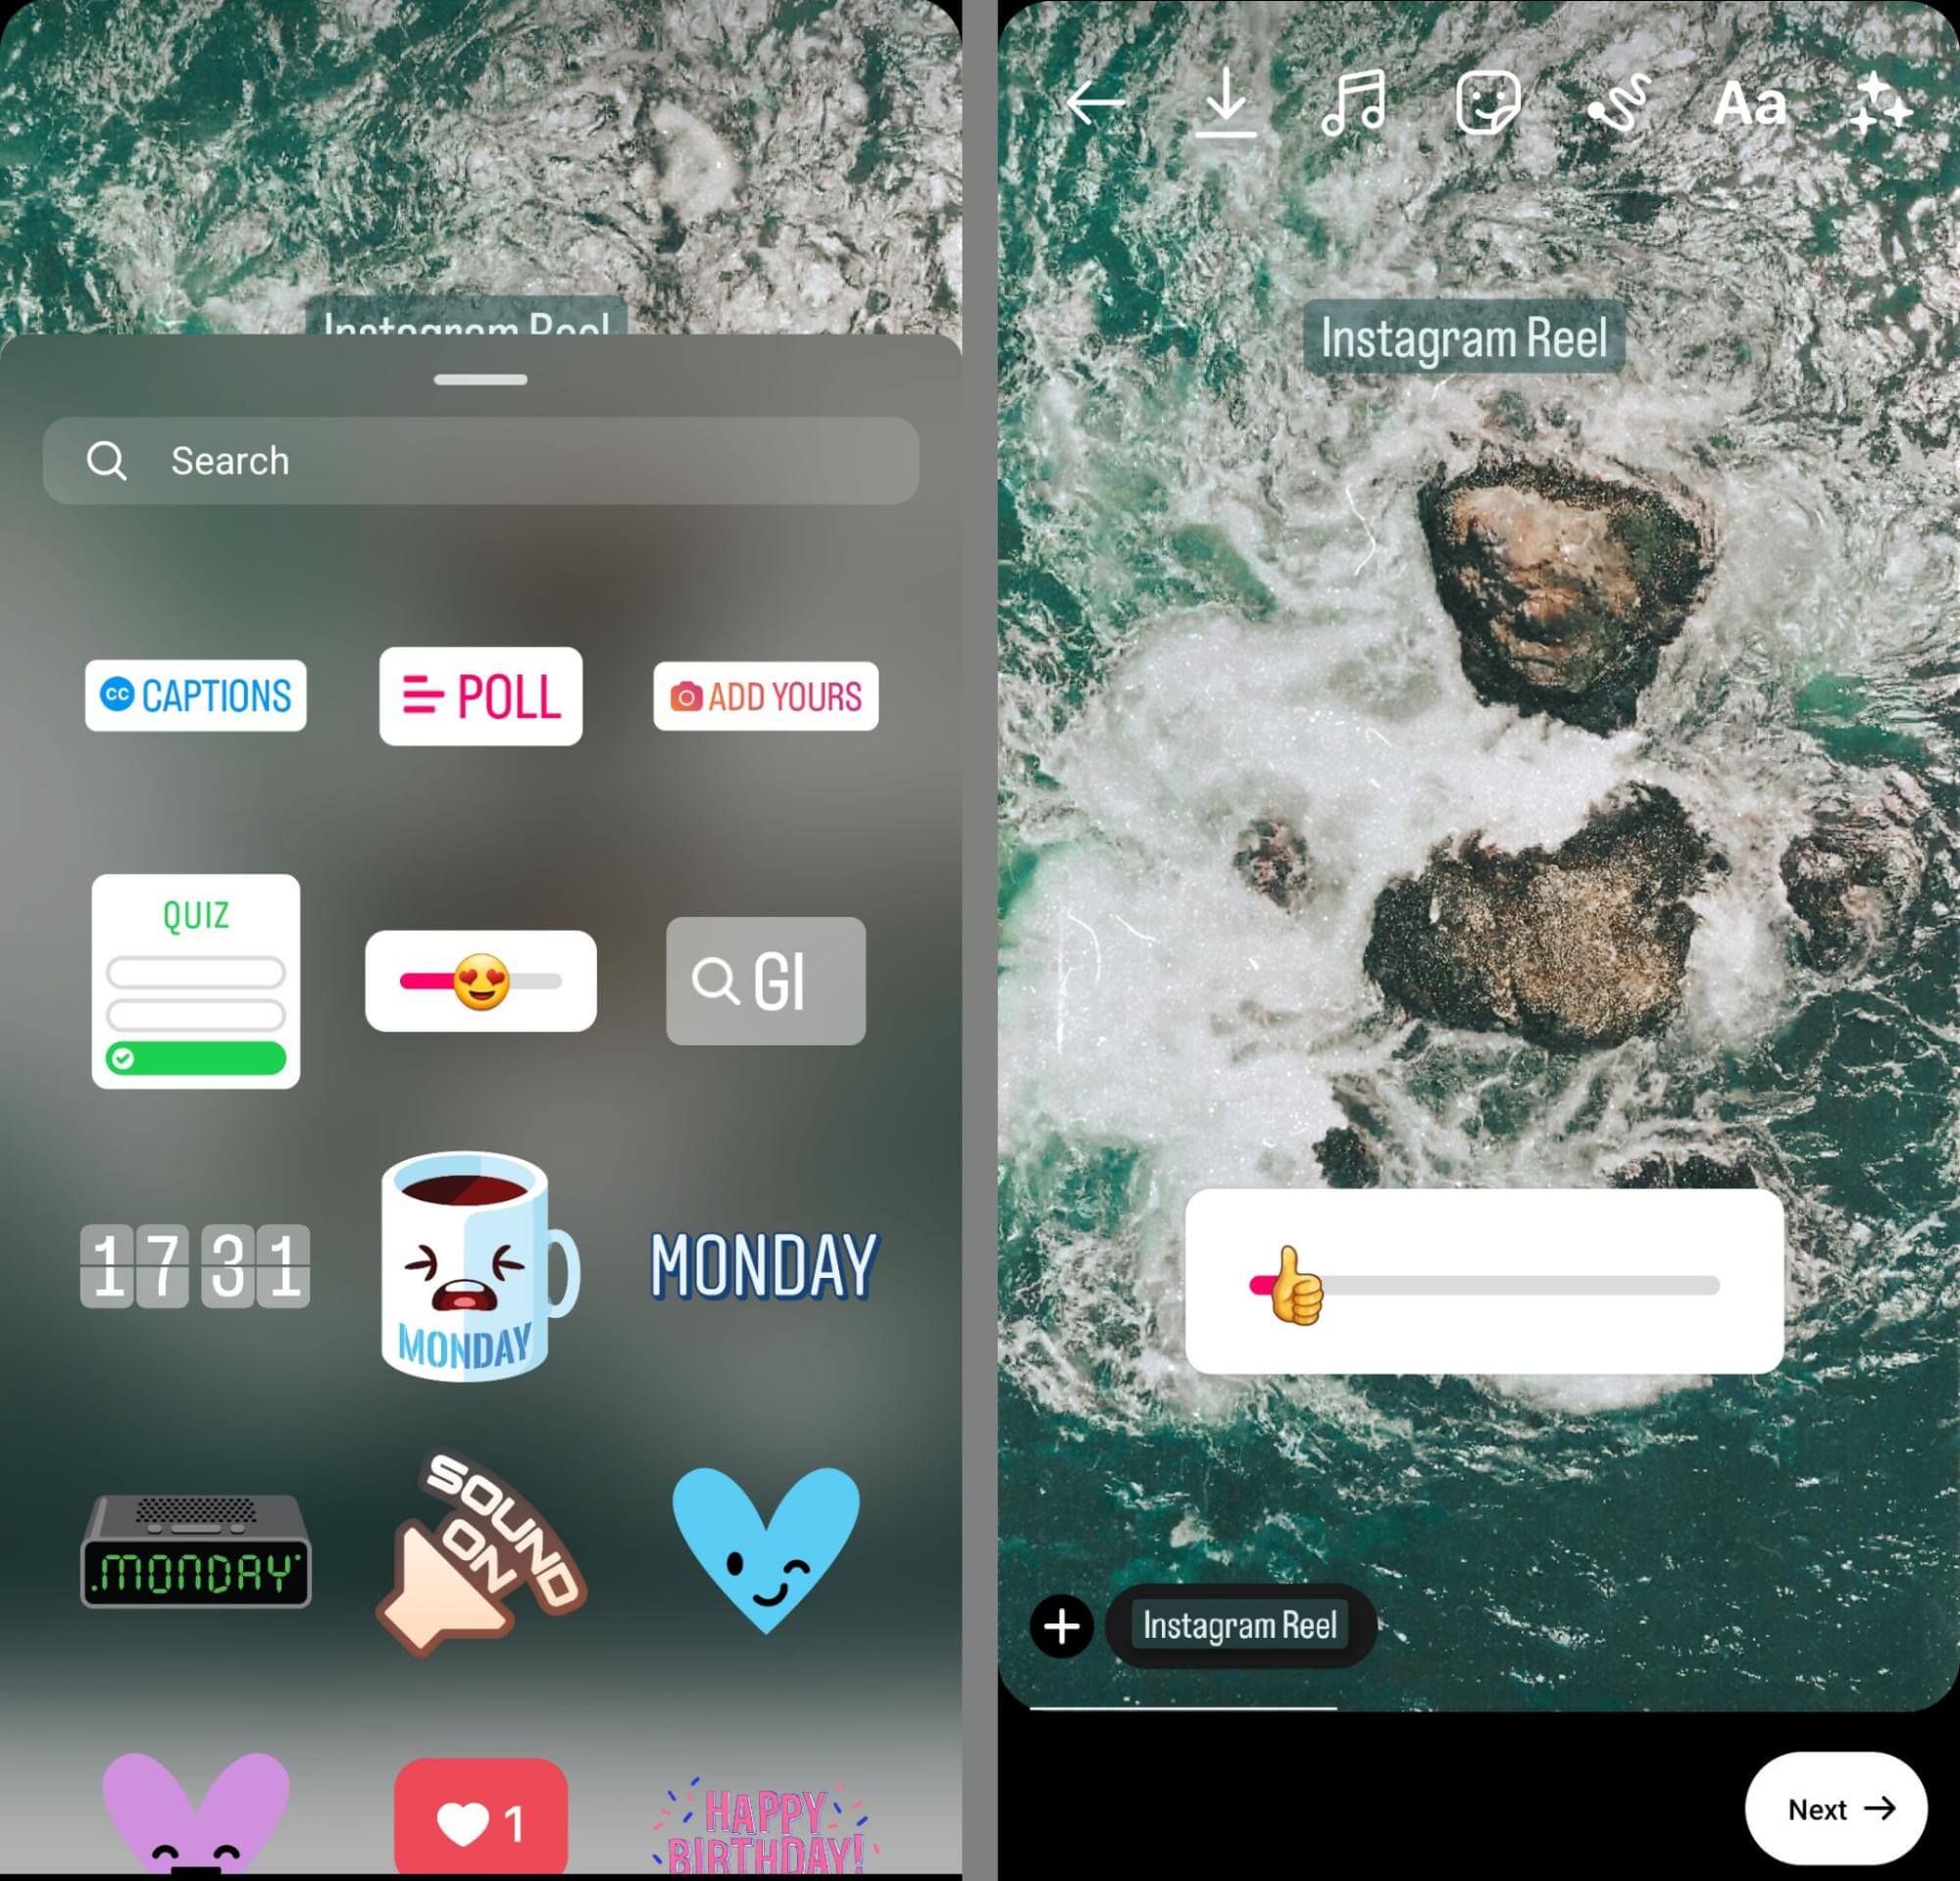 how-to-create-a-short-form-video-workflow-publish-9-16-aspect-ratio-post-to-instagram-sticker-tray-example-6